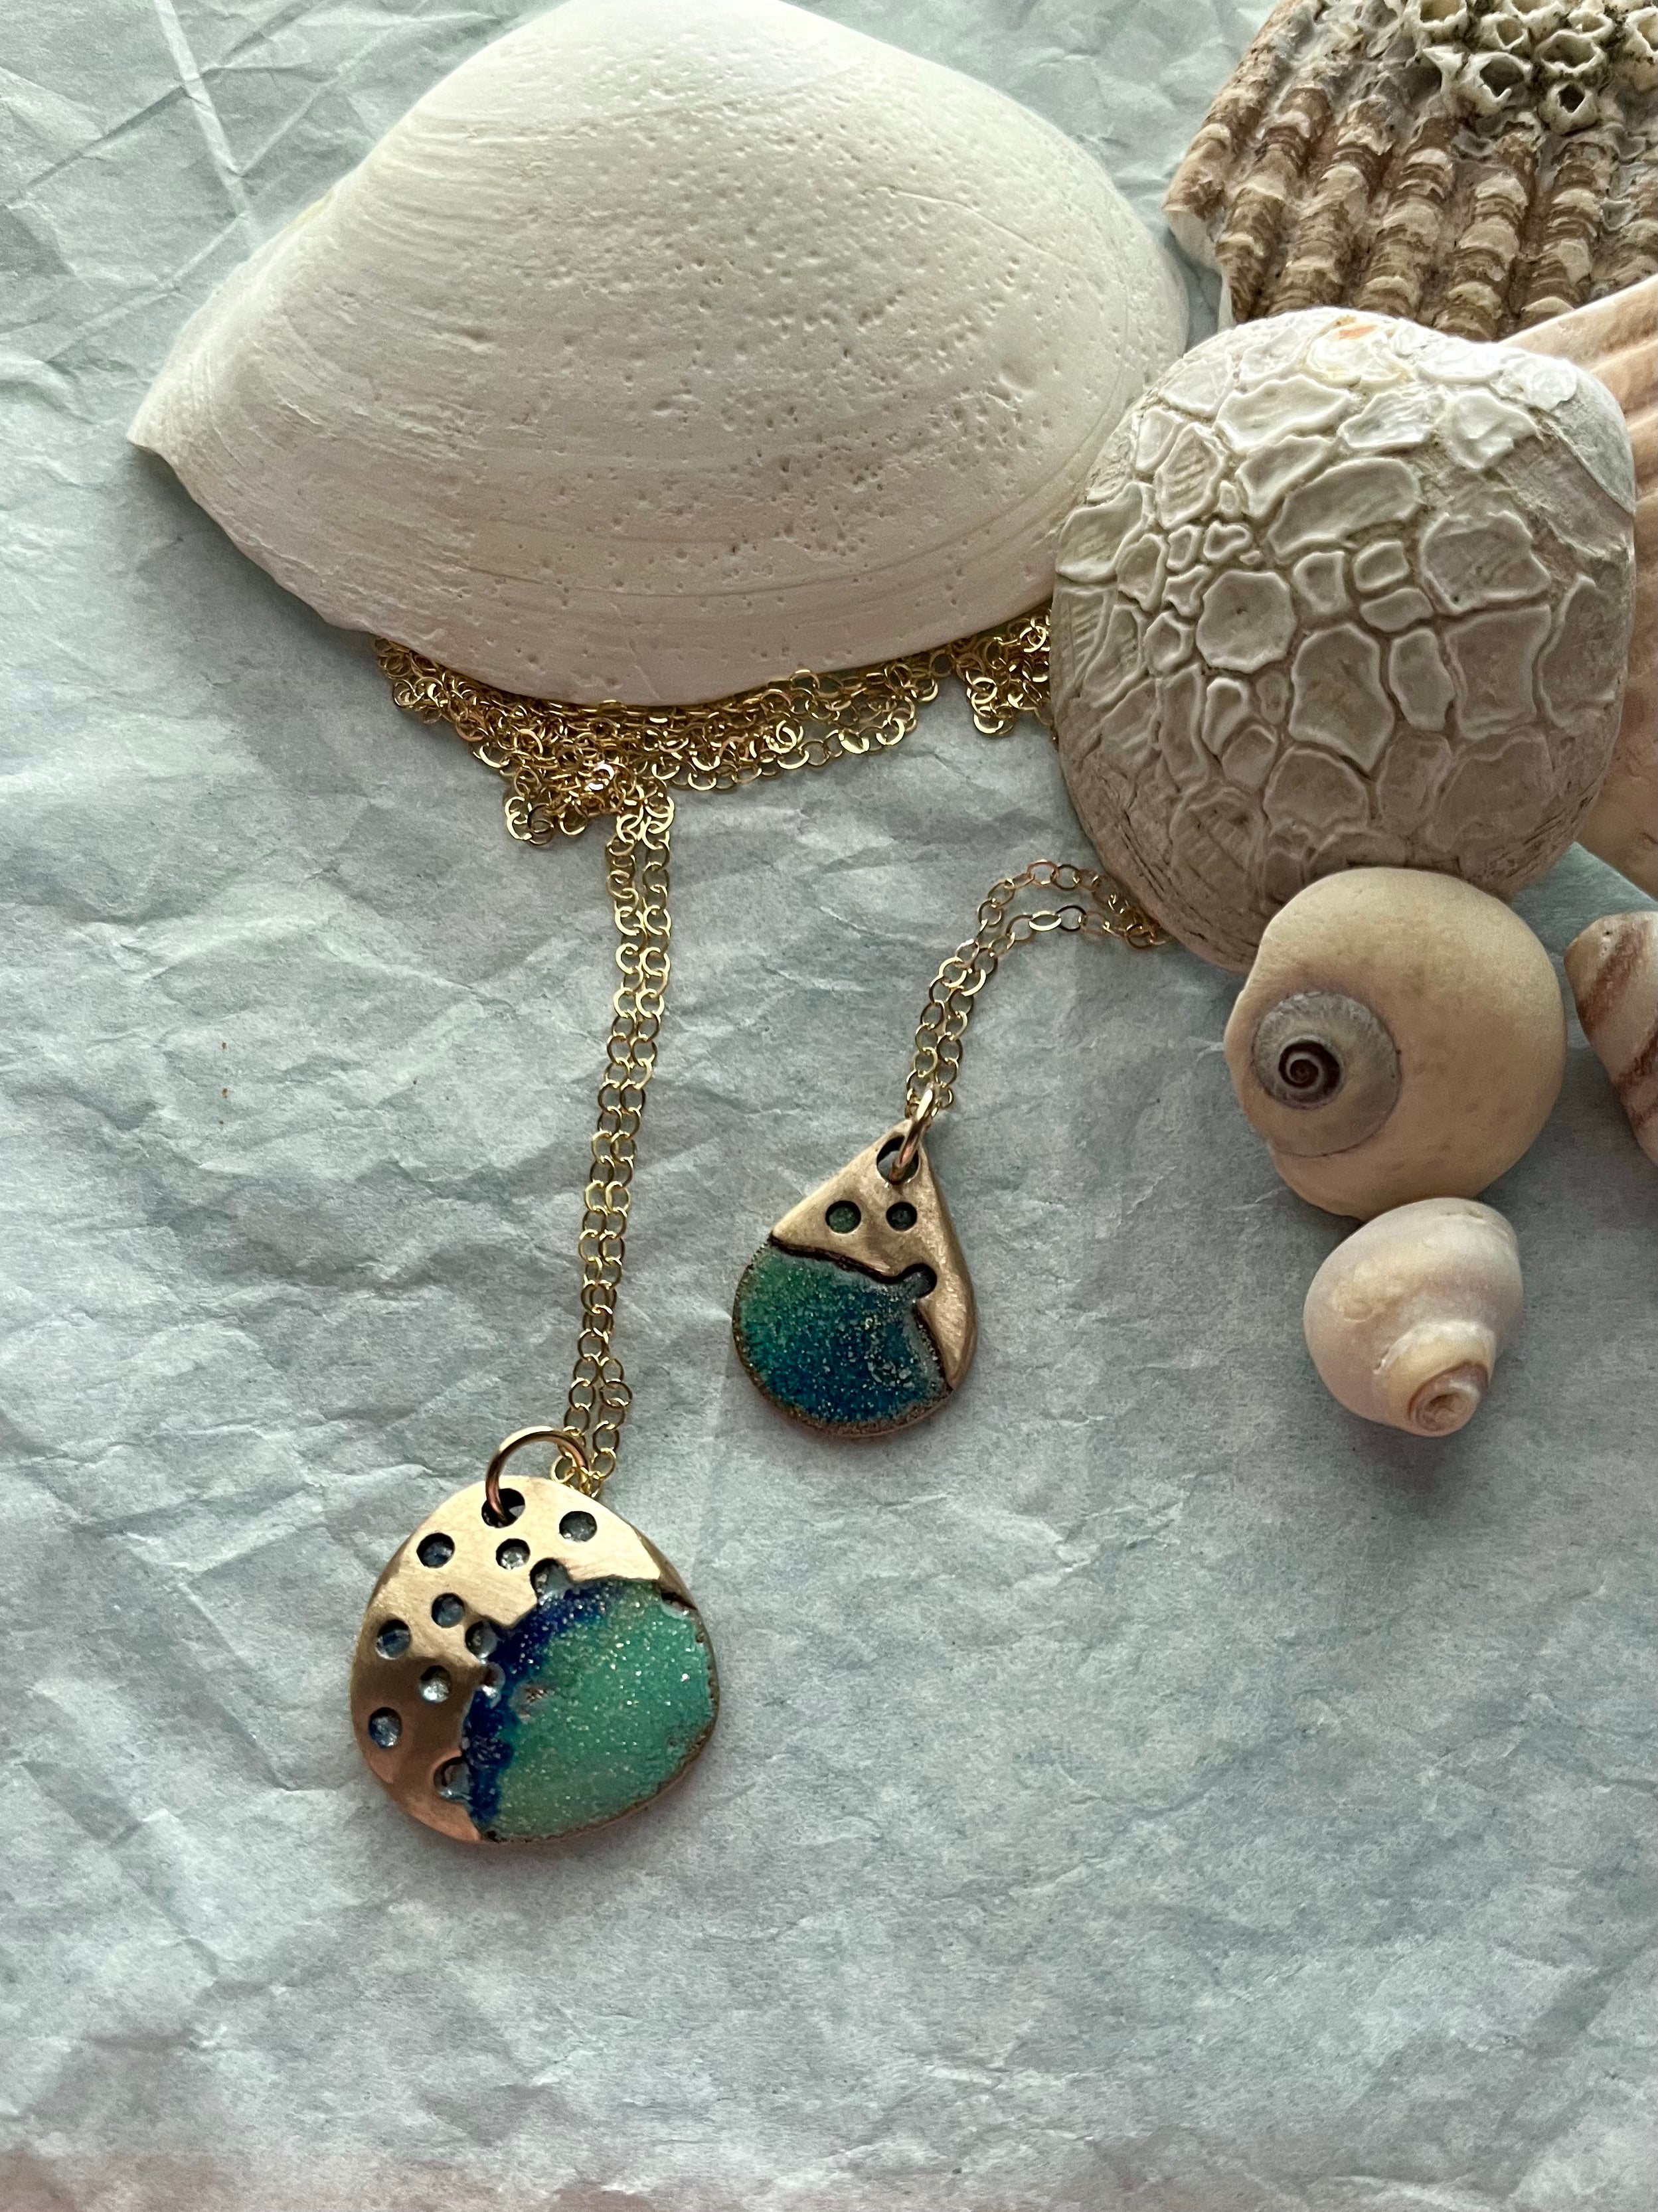 Two new bronze art jewelry necklaces with seashells